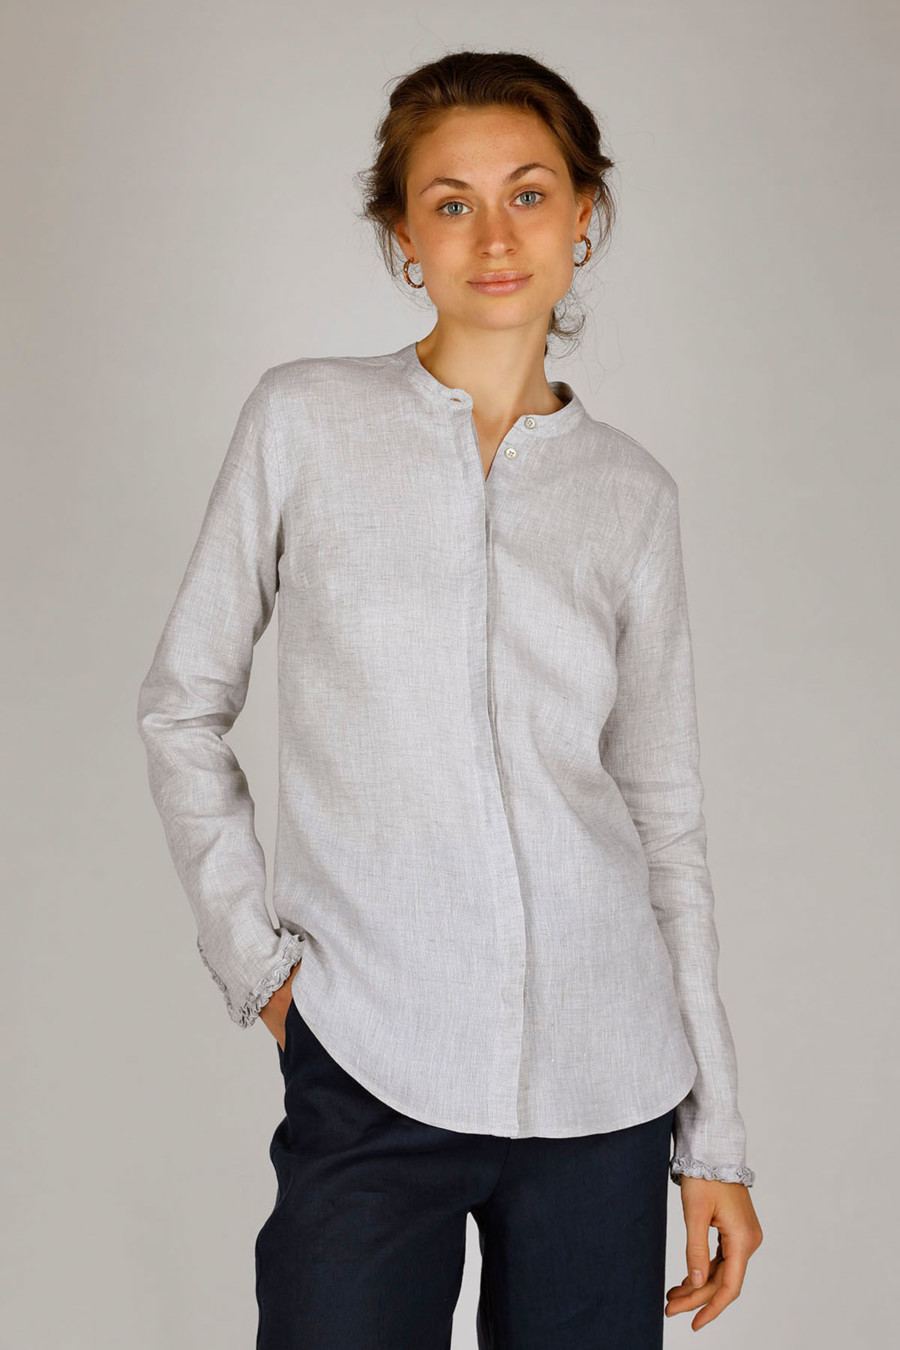 EASY - Waisted blouse in natural linen - Colour: Silver